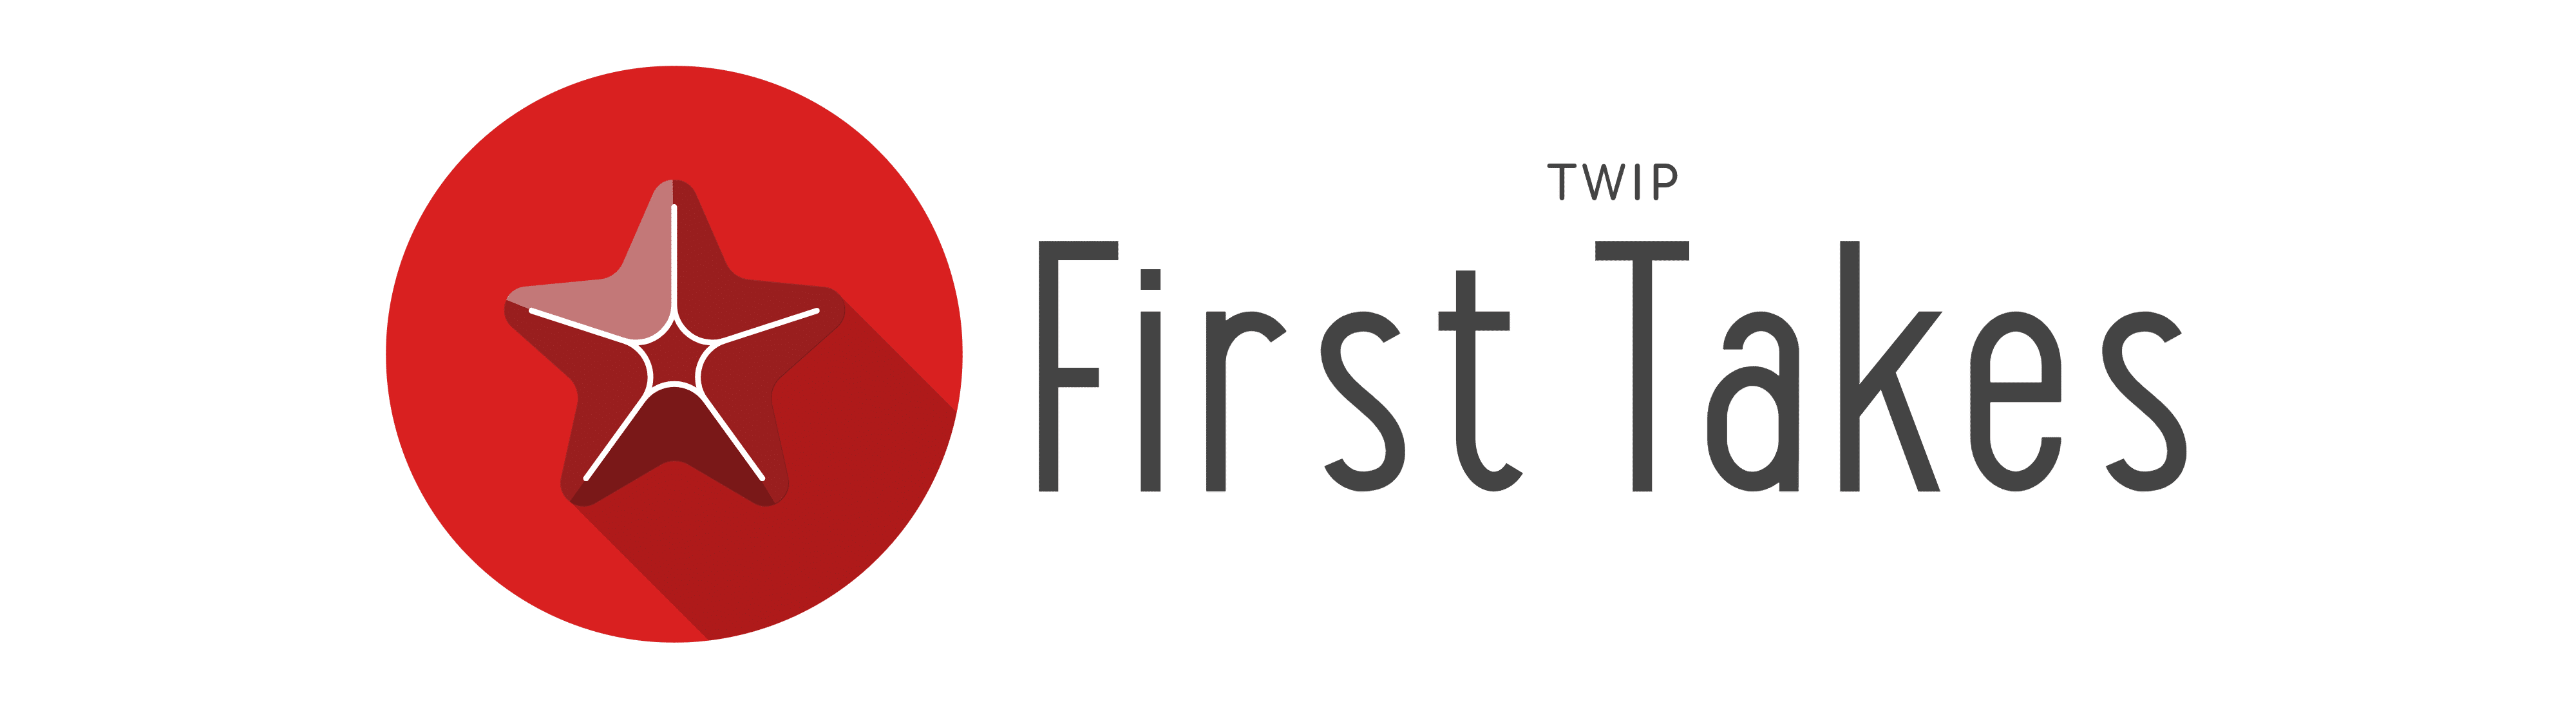 TWIP First Takes